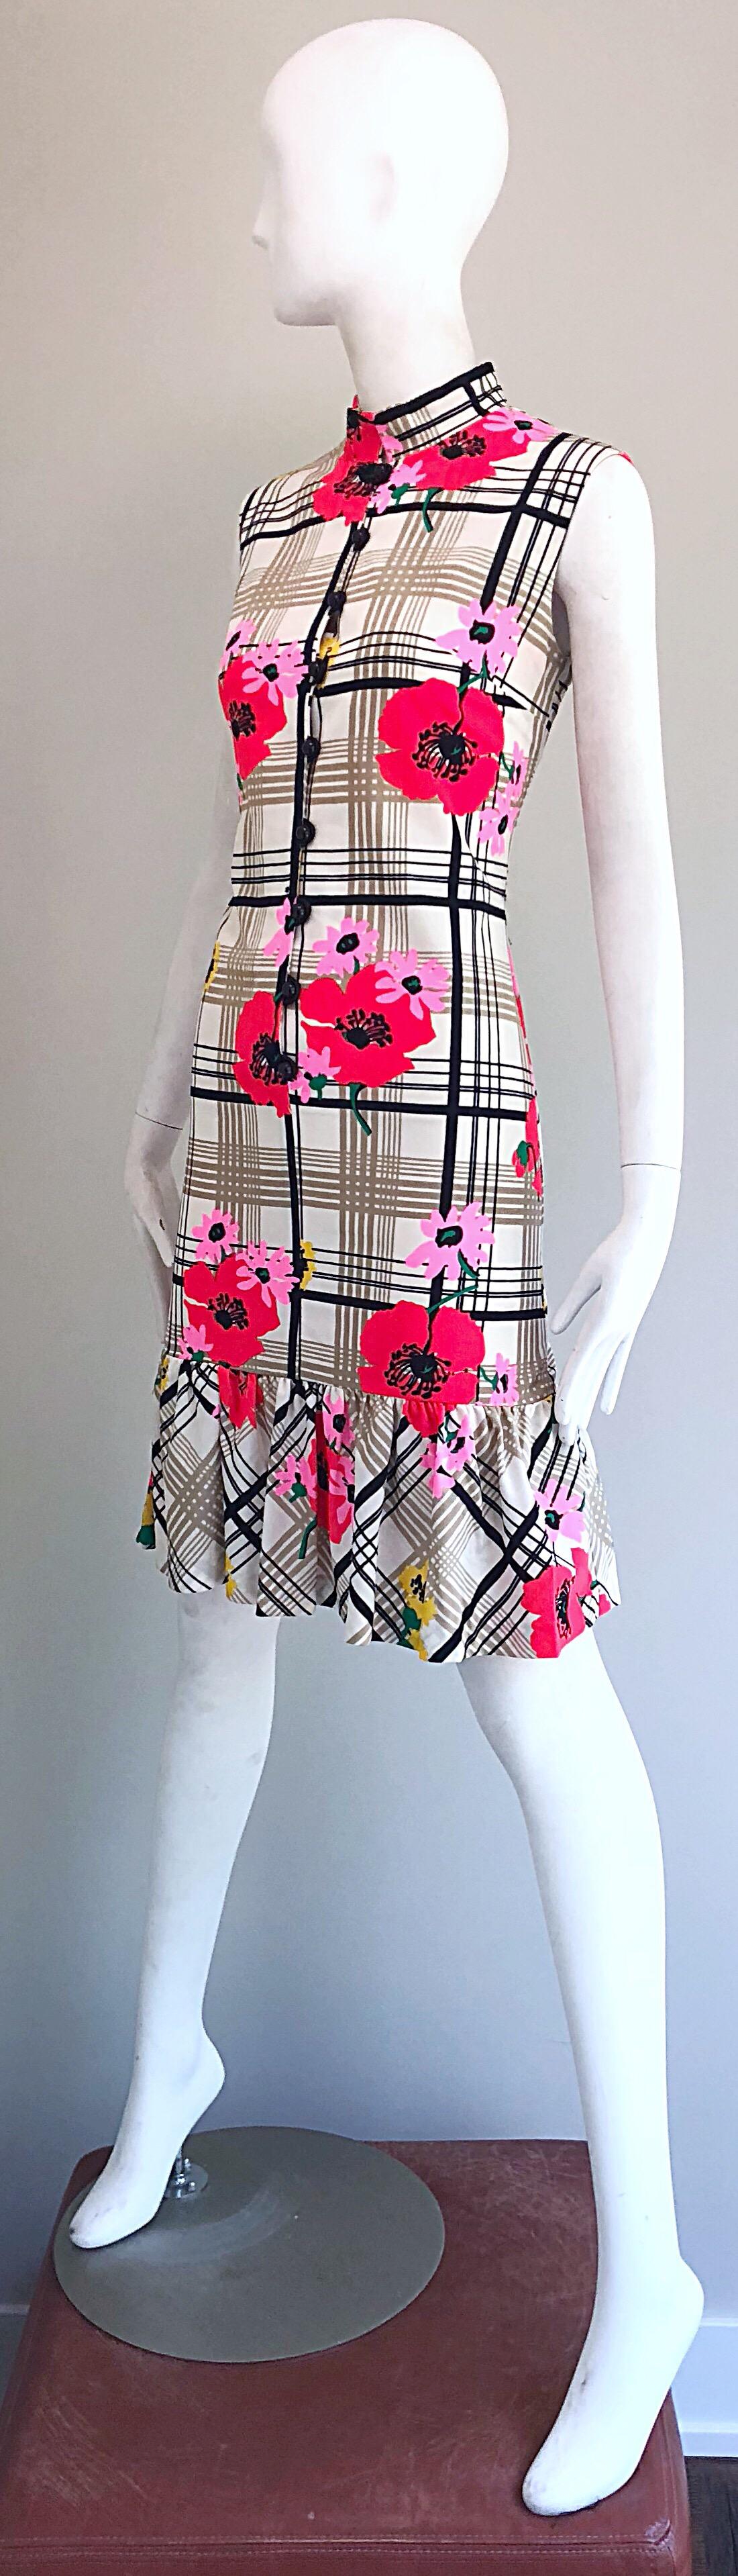 Gray Chic 1960s Stripes and Flowers Black and White Colorful Vintage 60s Shift Dress